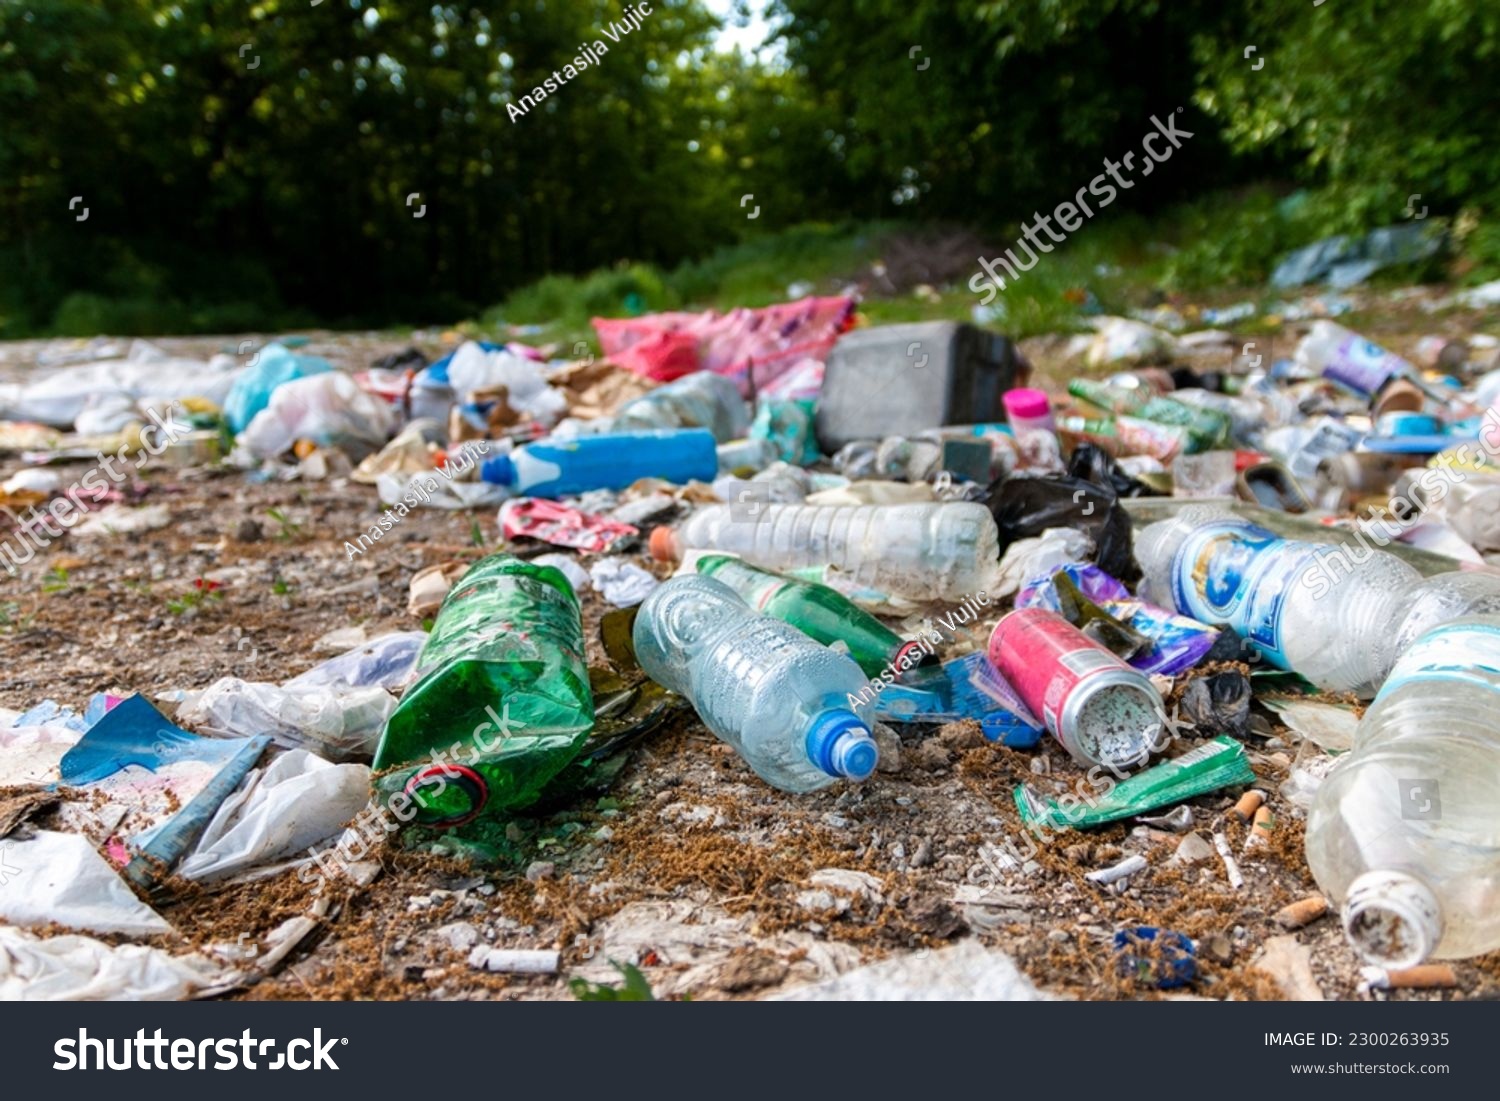 Piles of garbage in the forest, random dumping in nature. Stink heap, plastic bag and bottles, rubbish in polluted green  grass of nature landscape background. The concept of human pollution of forest #2300263935